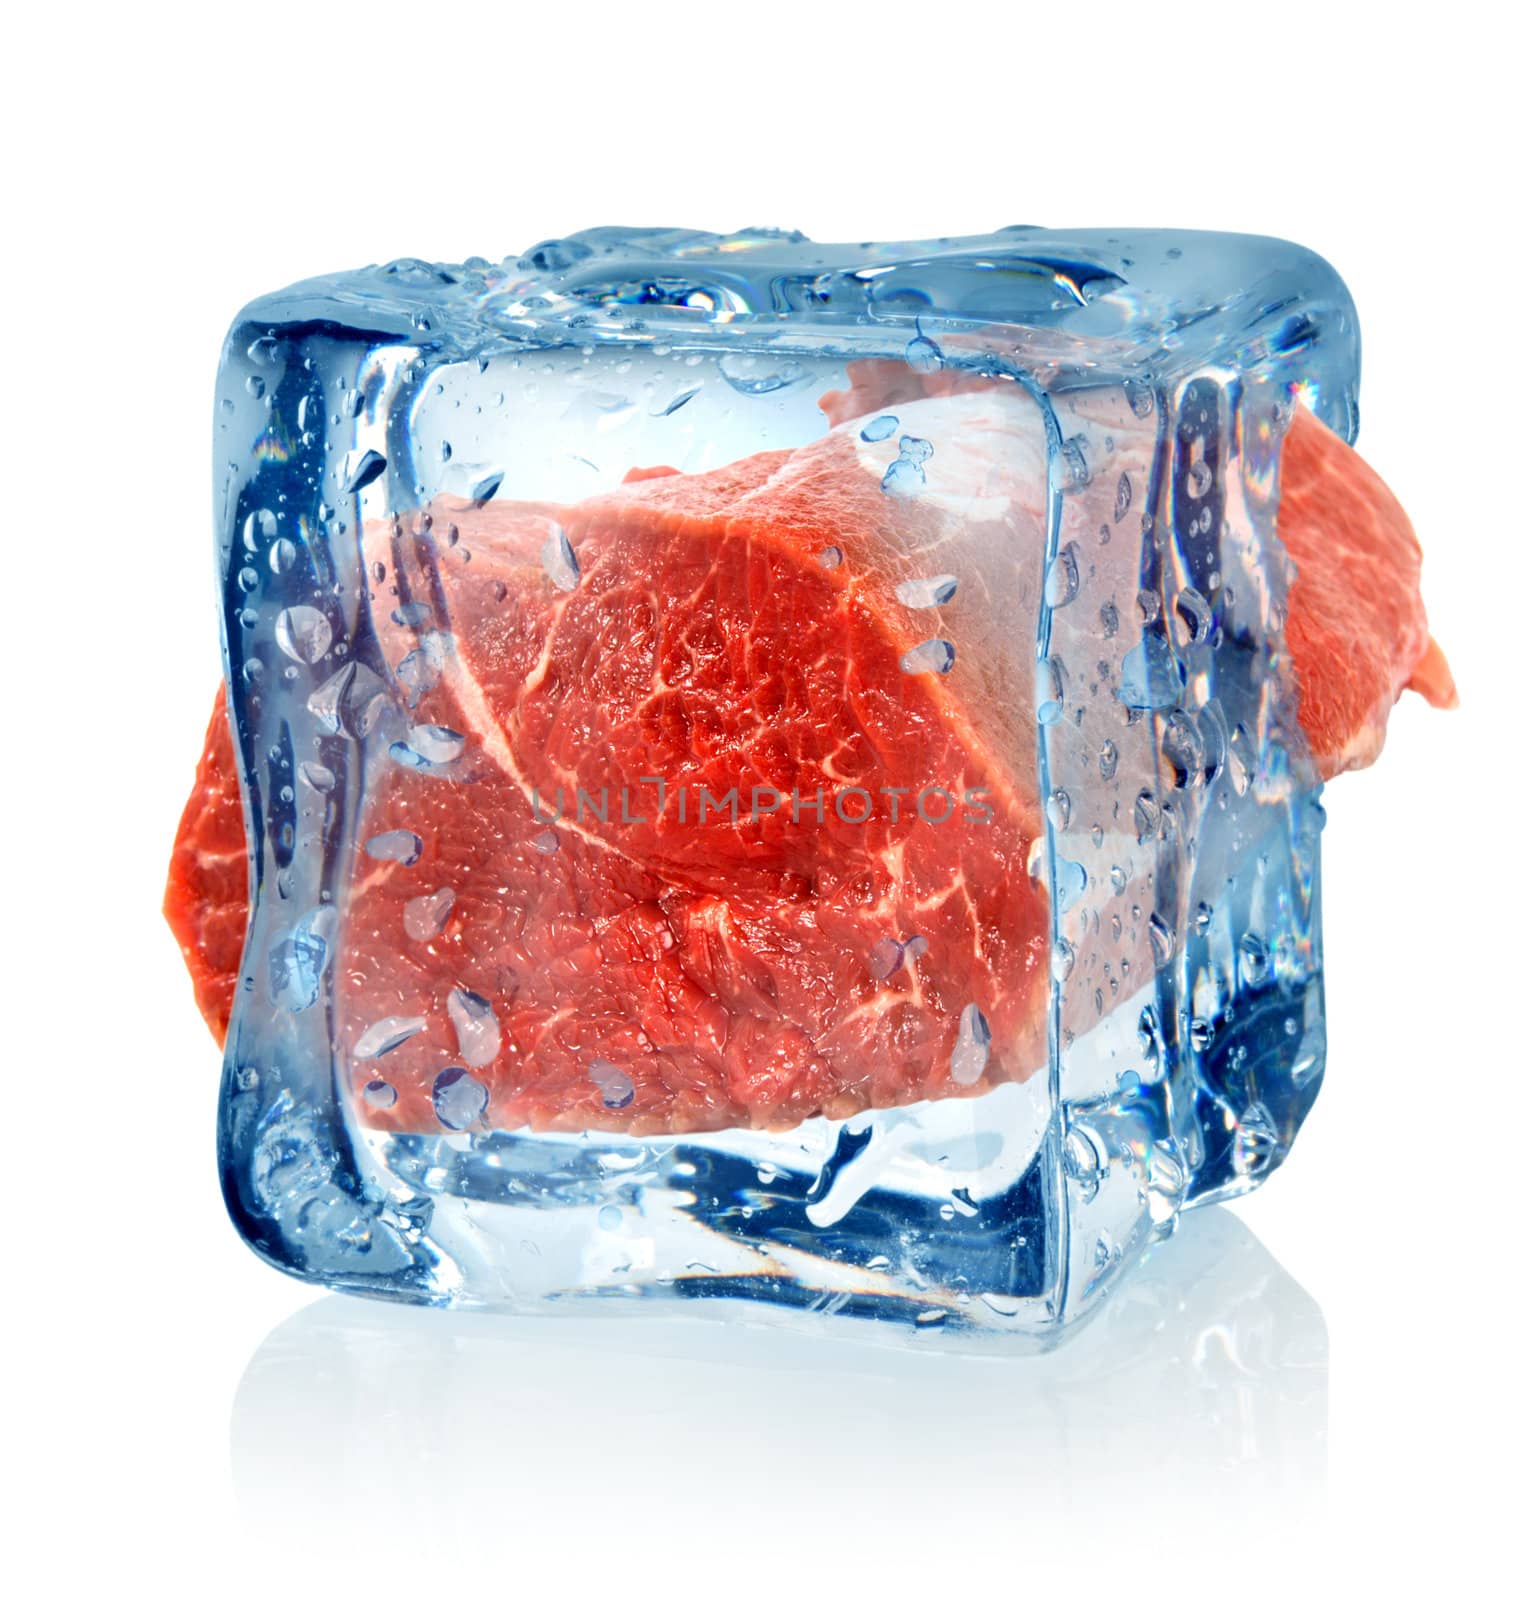 Ice cube and beef isolated on a white background